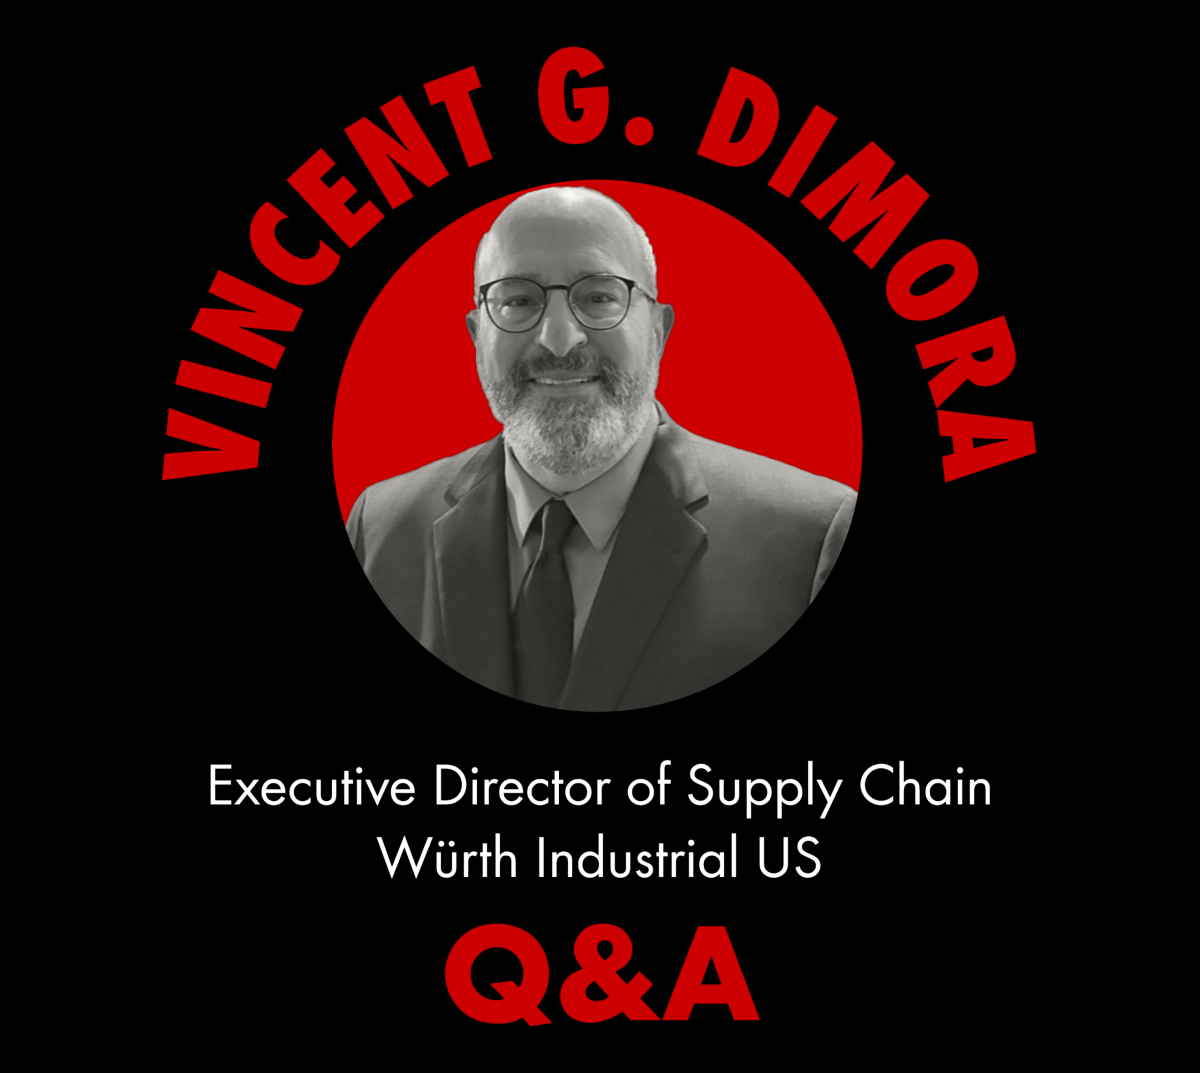 Vincent G. Dimora, Executive Director of Supply Chain, Würth Industrial US